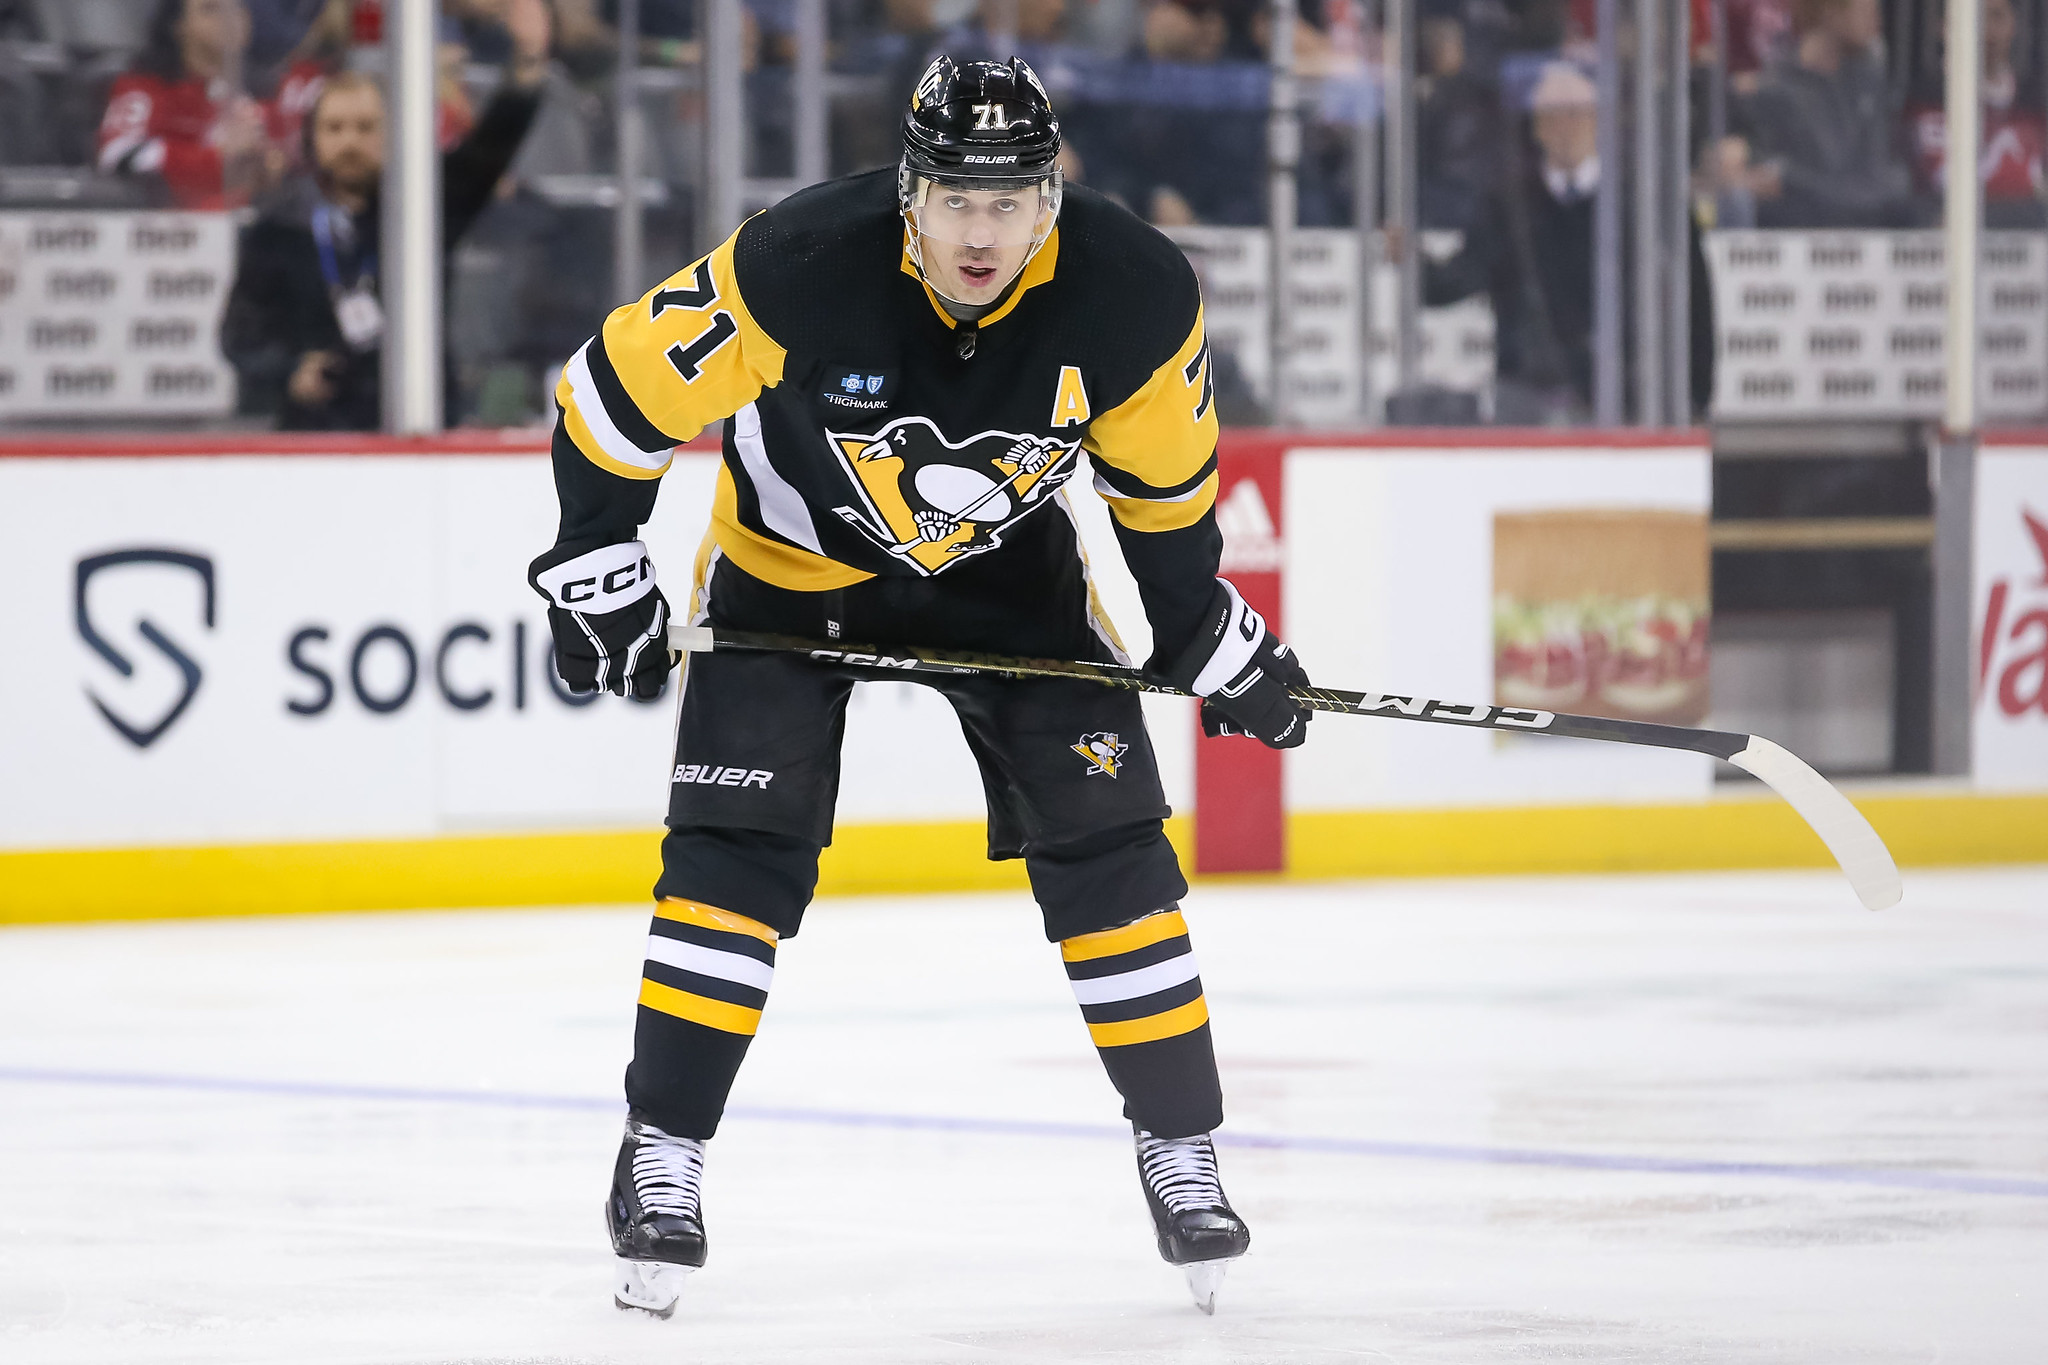 Rust scores twice, Penguins pull away from Capitals 6-3 - The San